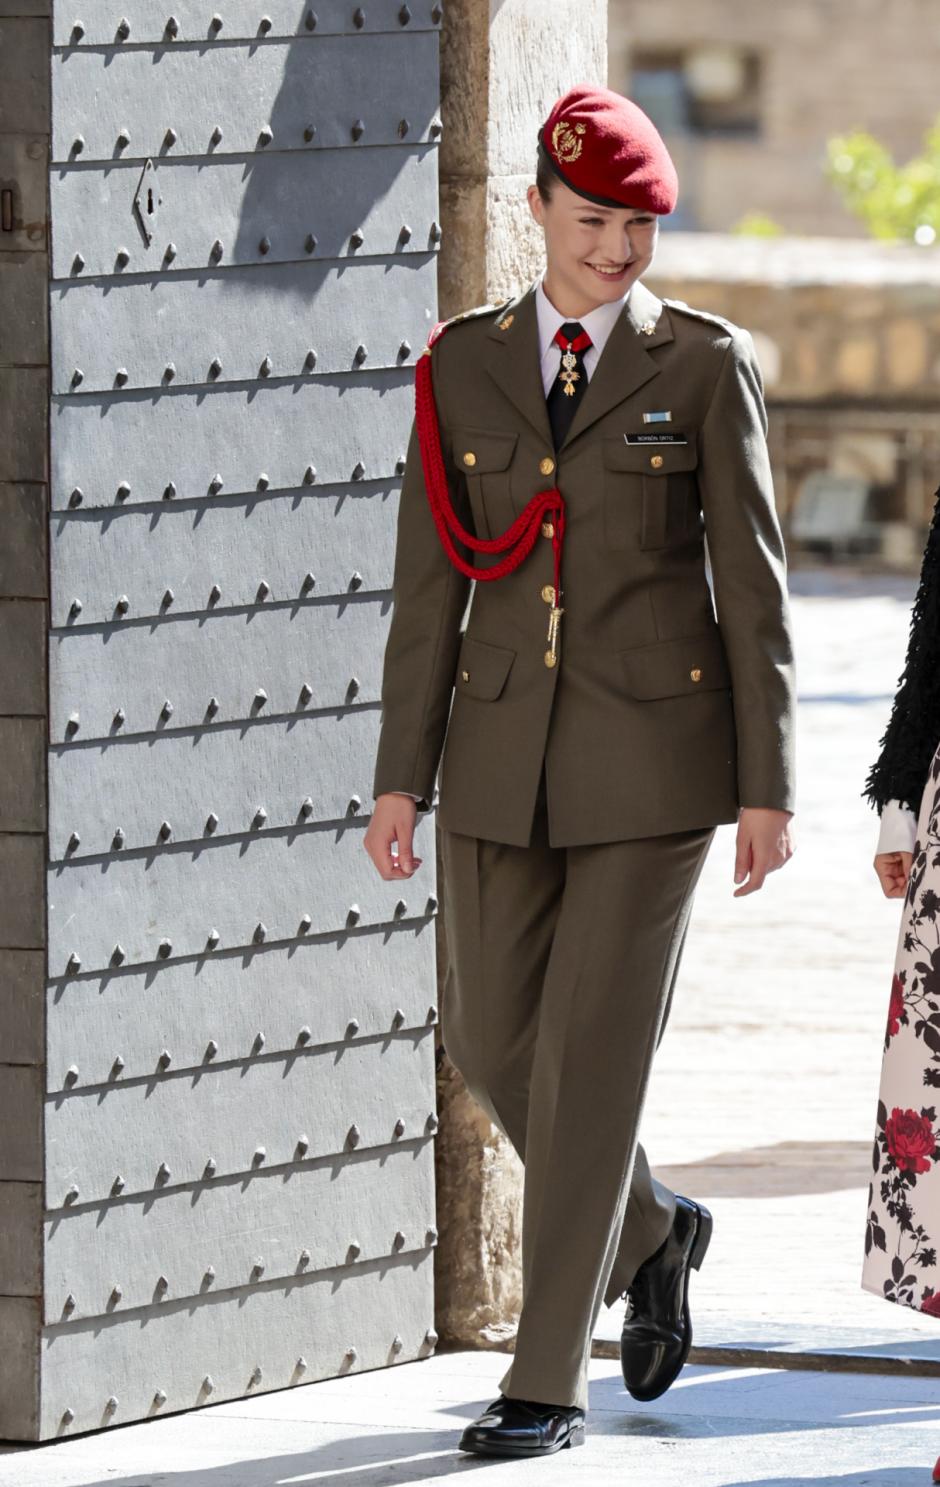 Princess of Asturias Leonor de Borbon during presentation of medals of the Parlament of Aragon in Zaragoza on Tuesday, 21 May 2024.